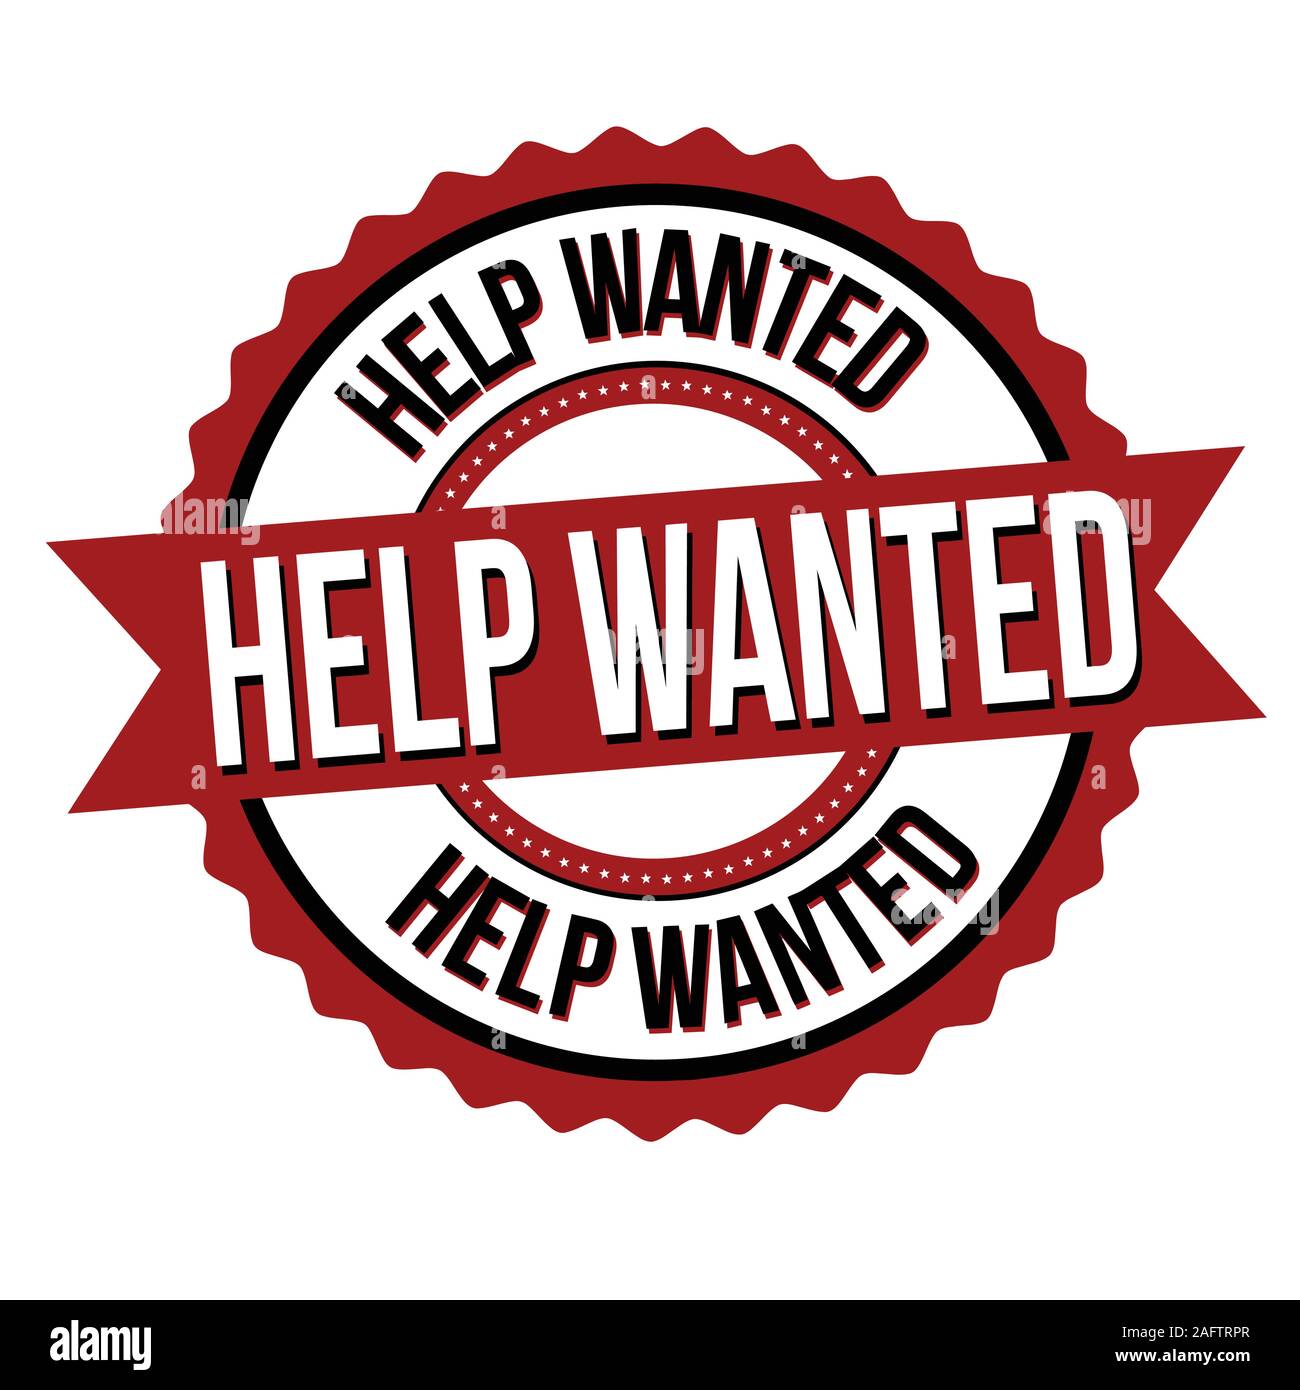 Help wanted label or sticker on white background, vector illustration Stock Vector